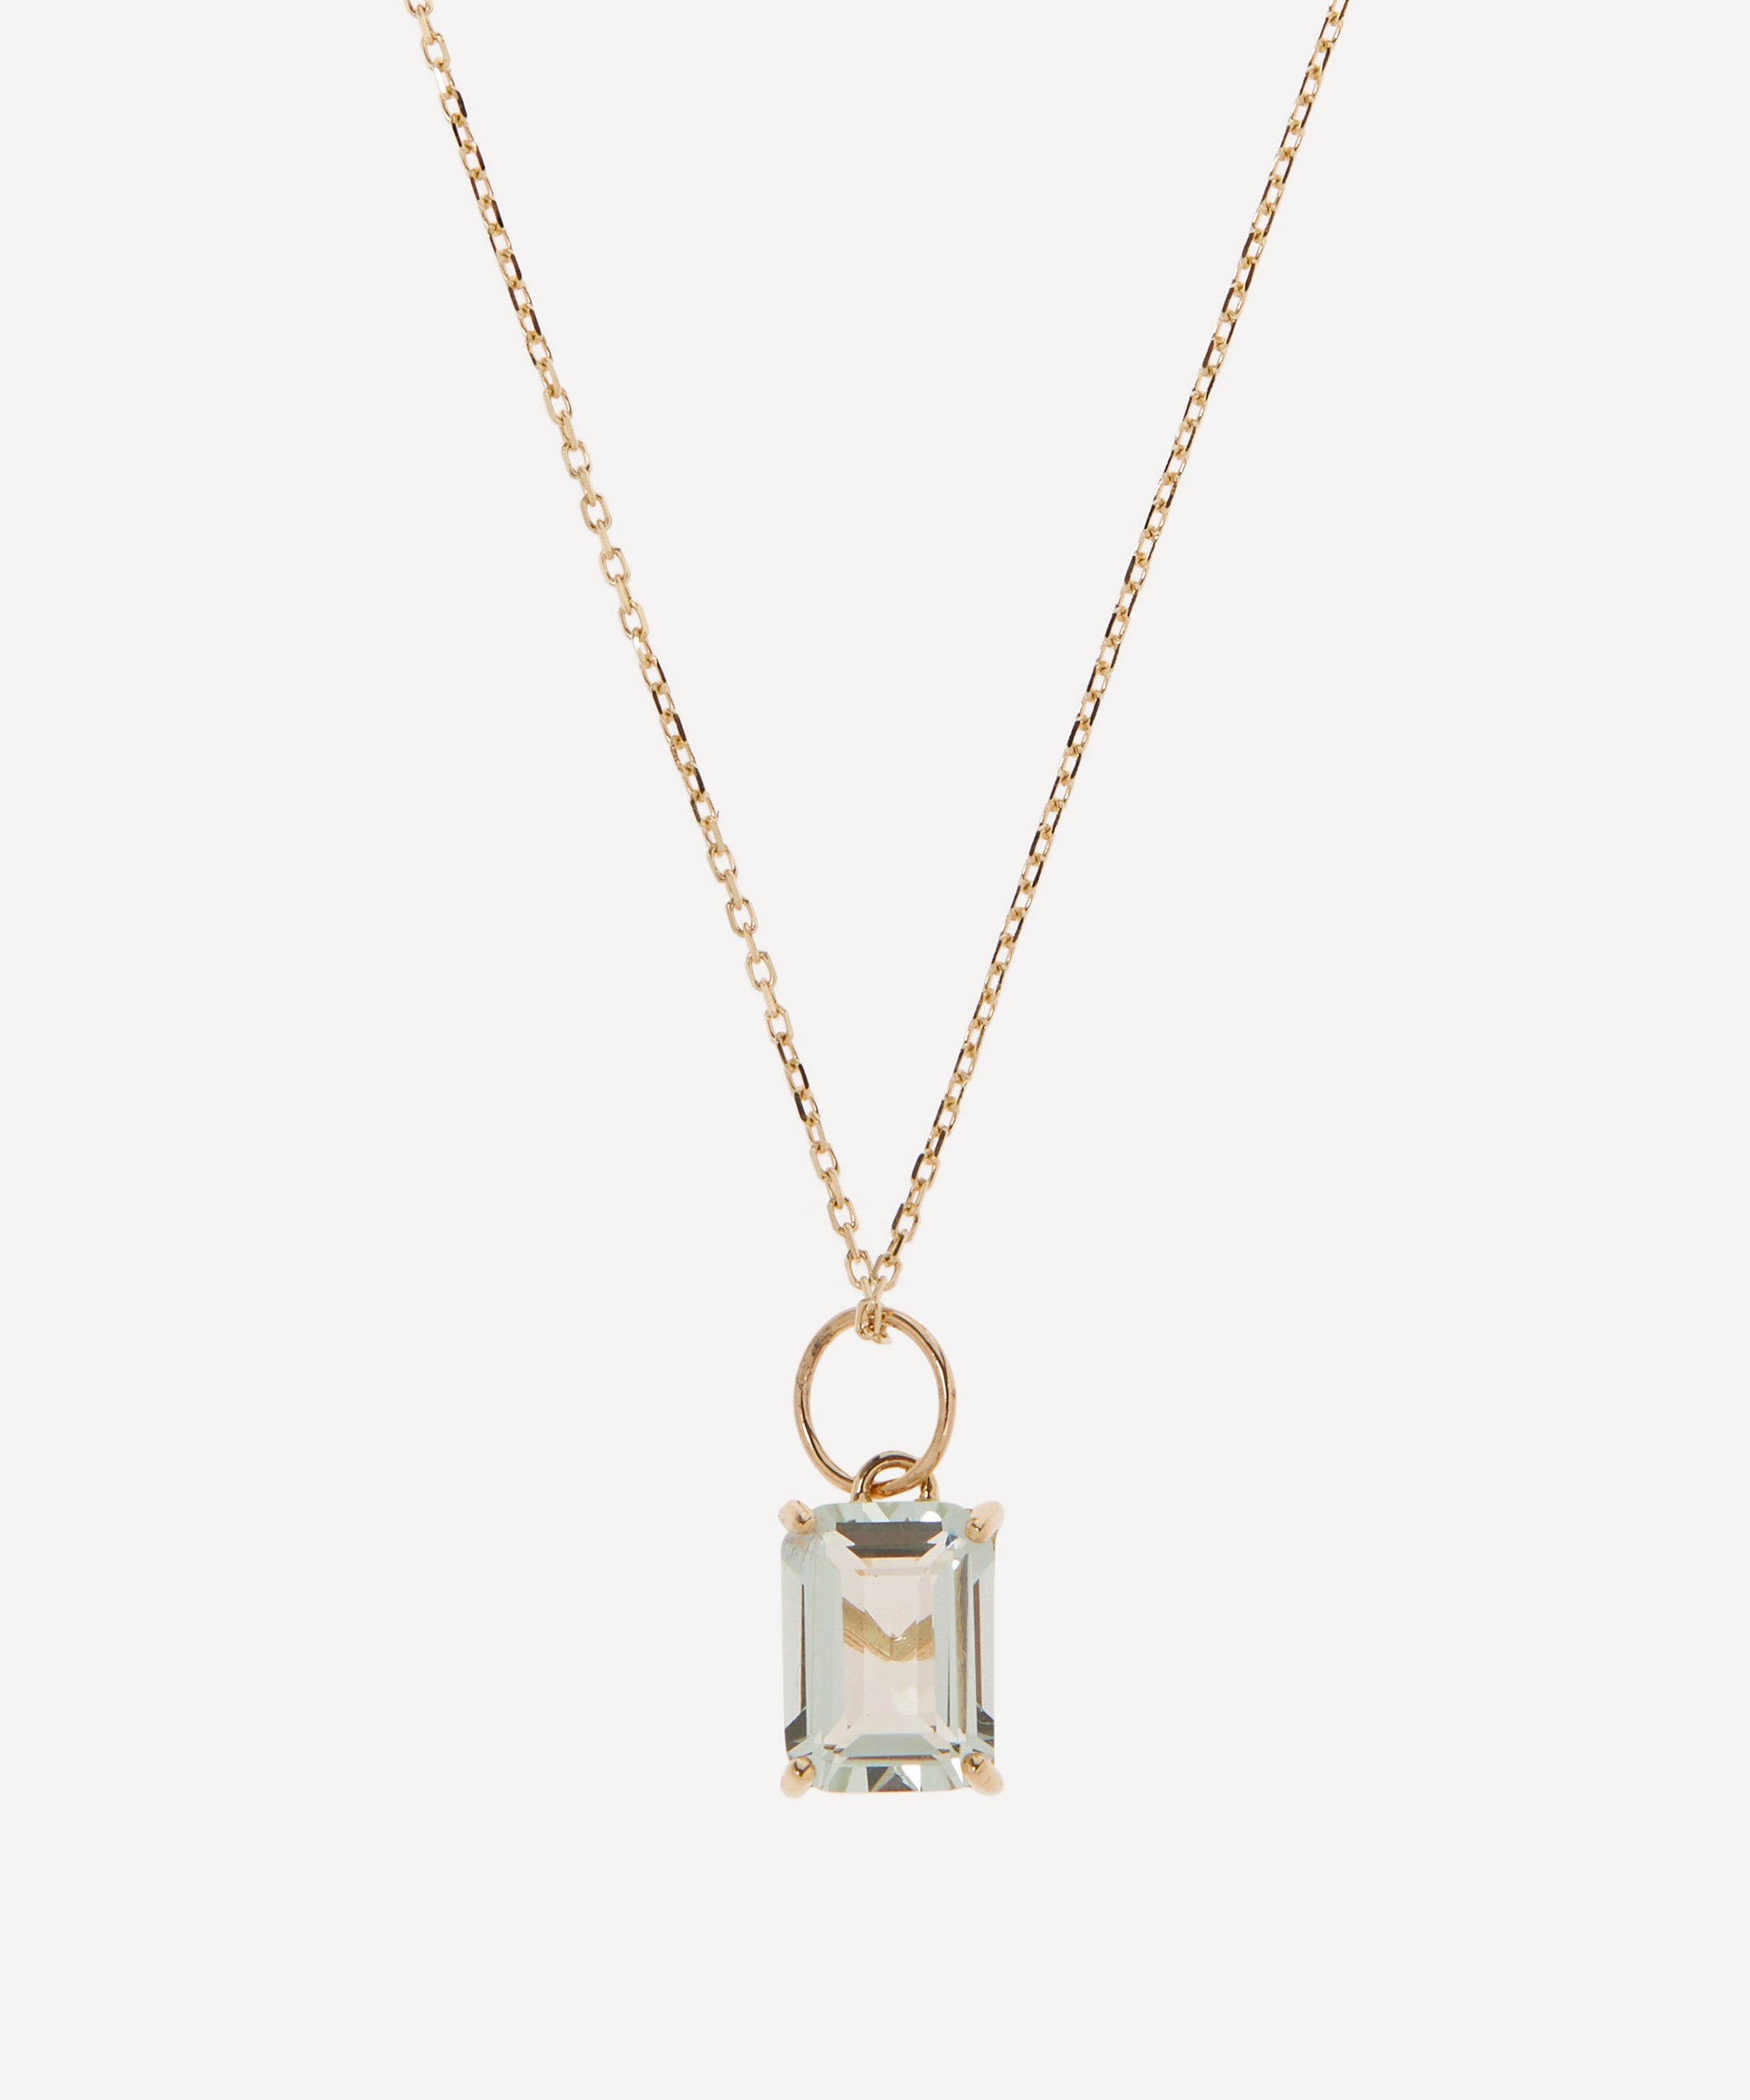 Mateo - 14ct Gold Emerald Cut Green Amethyst Pendant Necklace image number 0